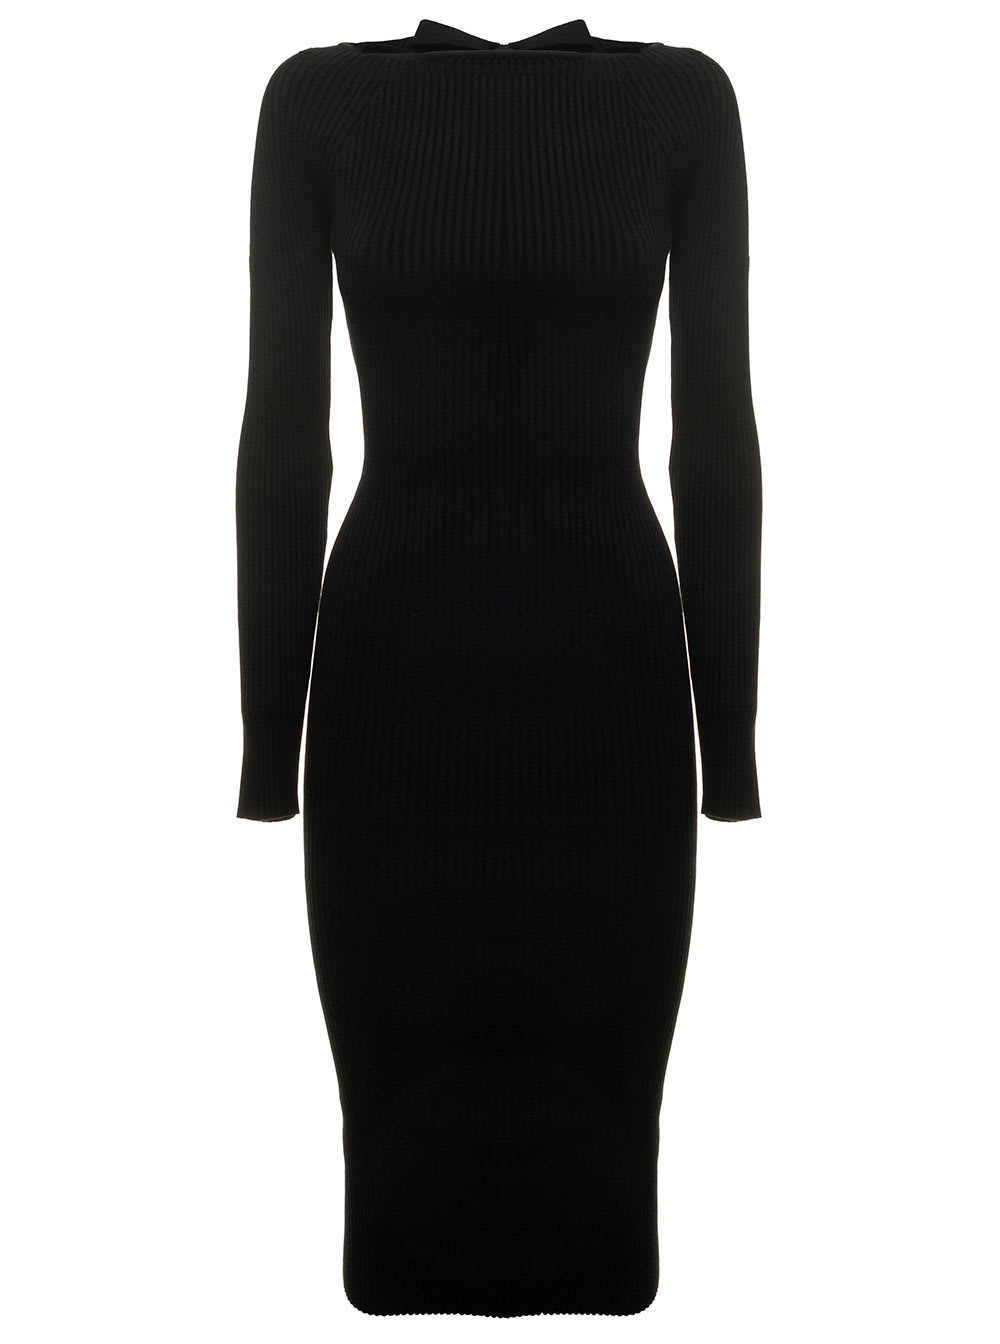 Giuseppe di Morabito Viscosa Knitted Dress With Chain Details